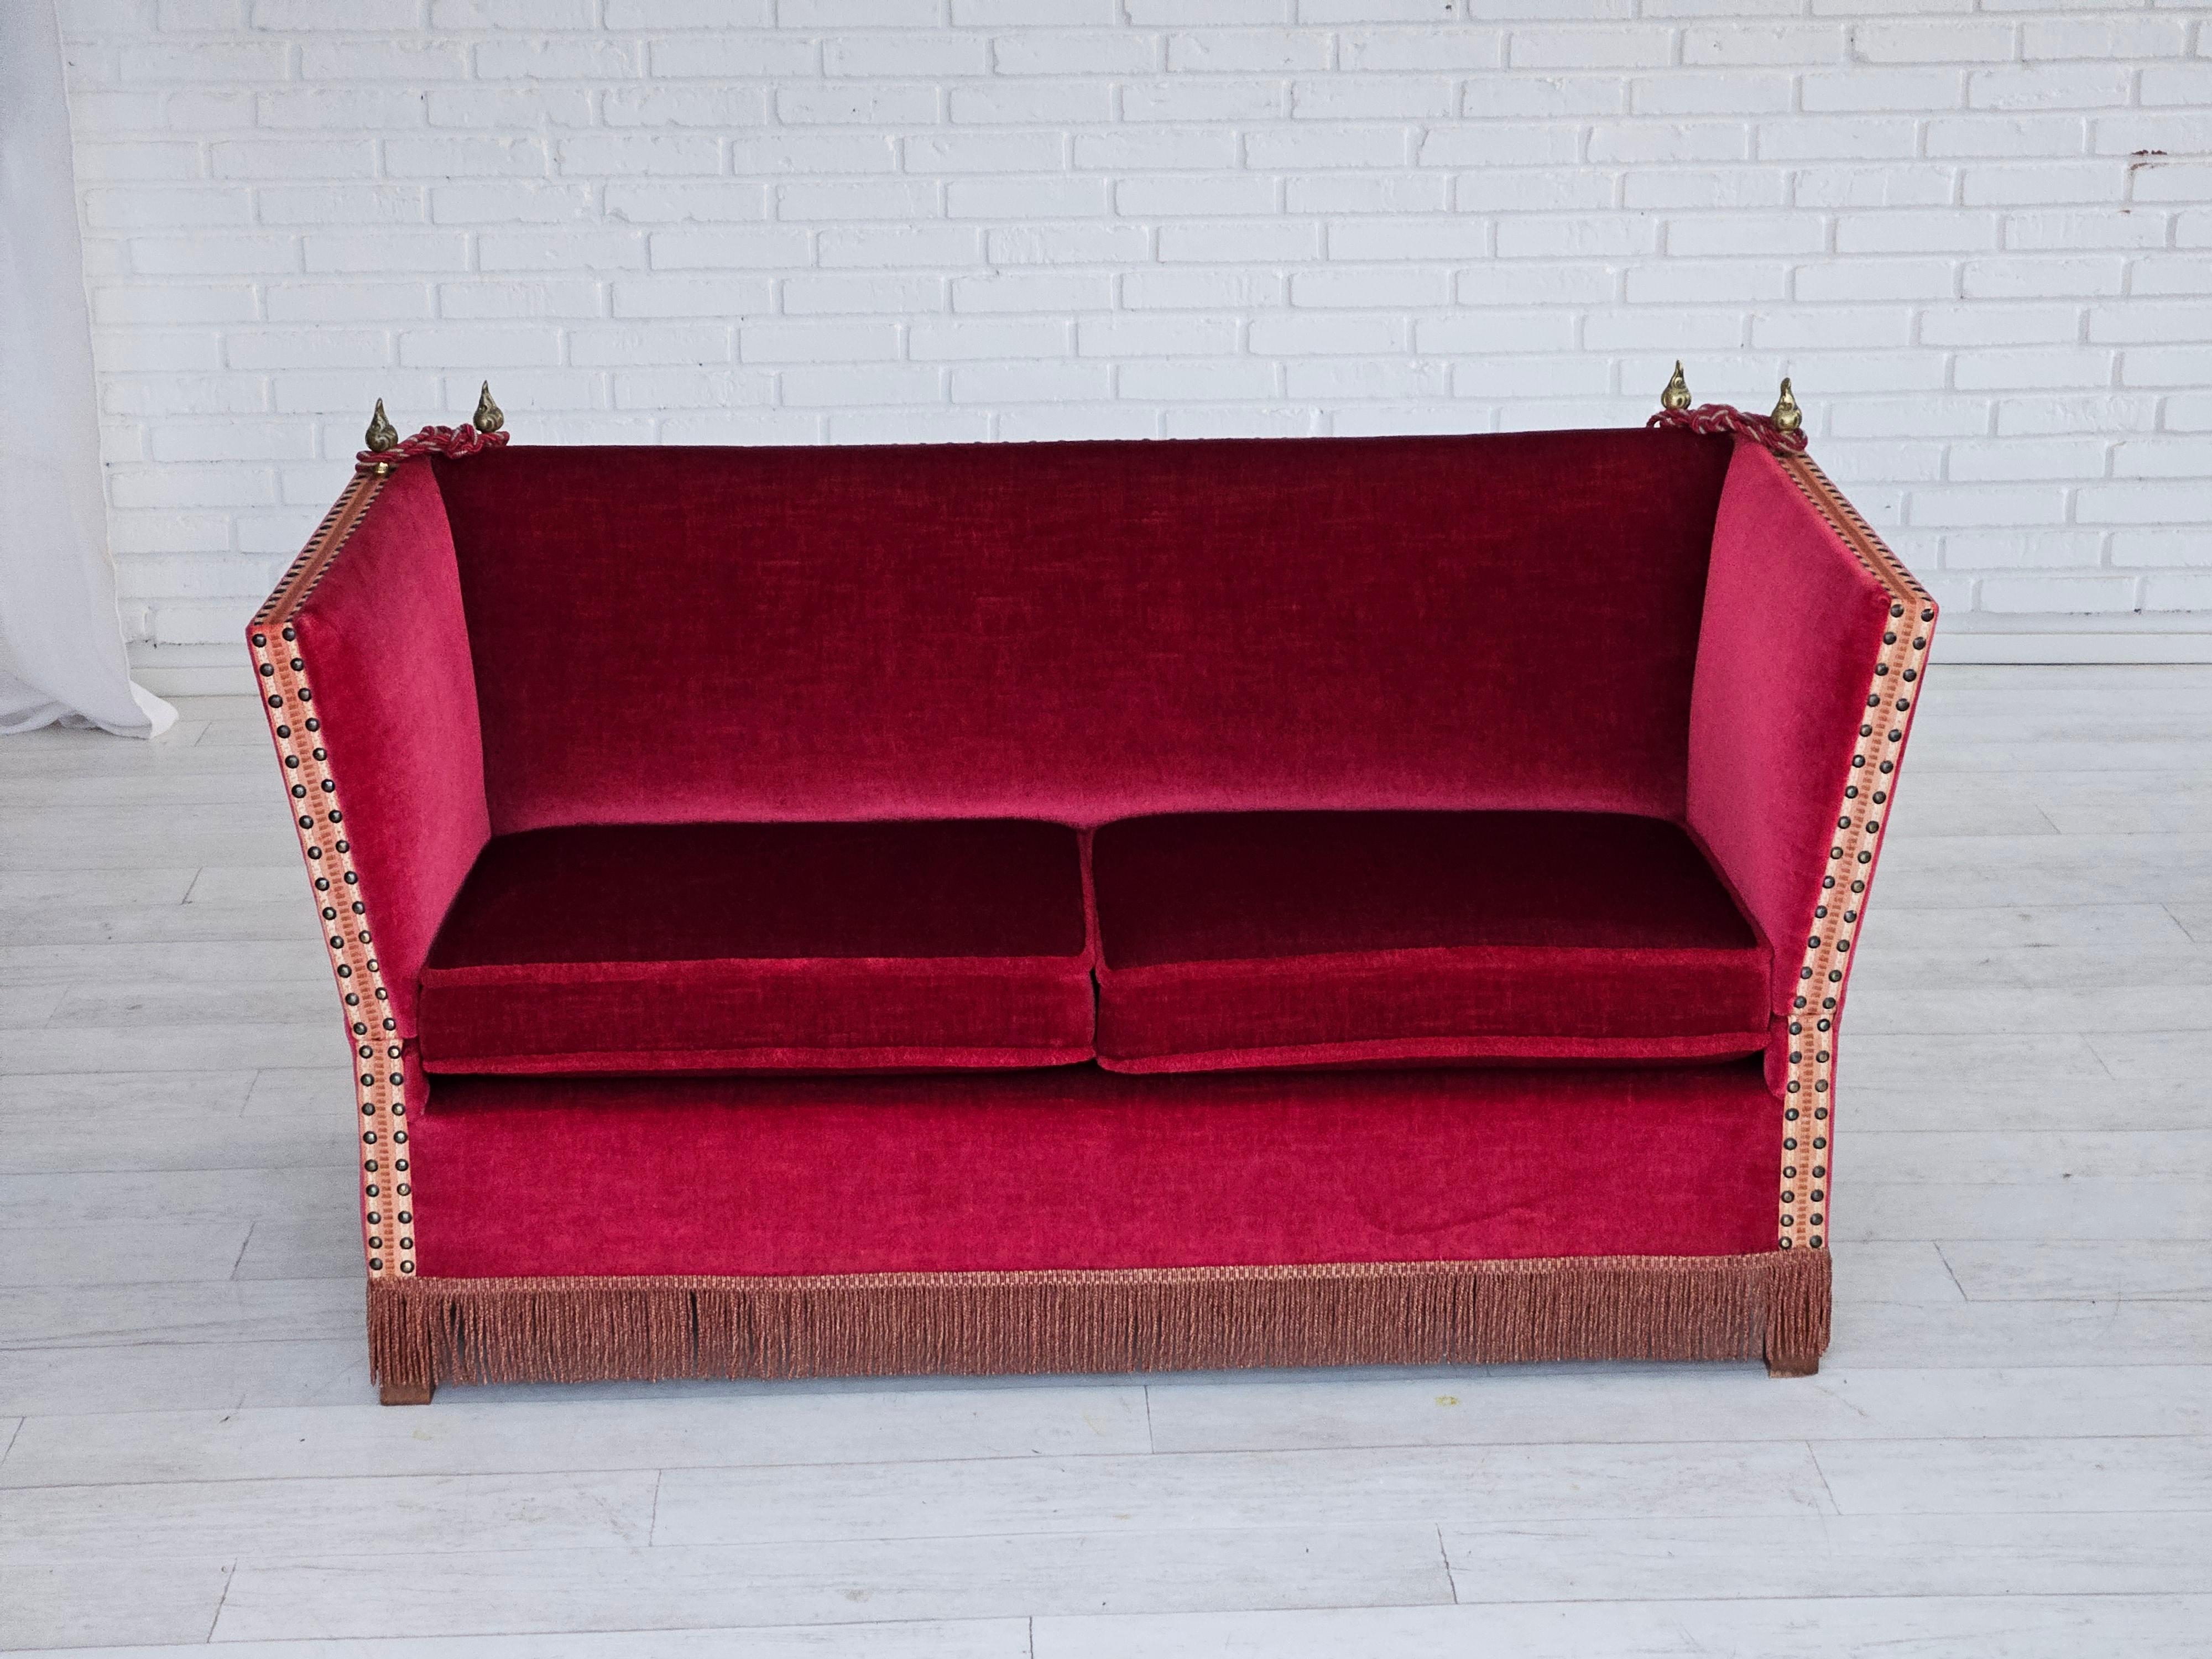 1960s, Danish drop-arm 2 seater sofa in original very good condition: no smells and no stains. Original cherry-red furniture velour, ash wood legs, cast brass pears. Springs in the seat cushions. Adjustable armrests (adjustment lever under the back